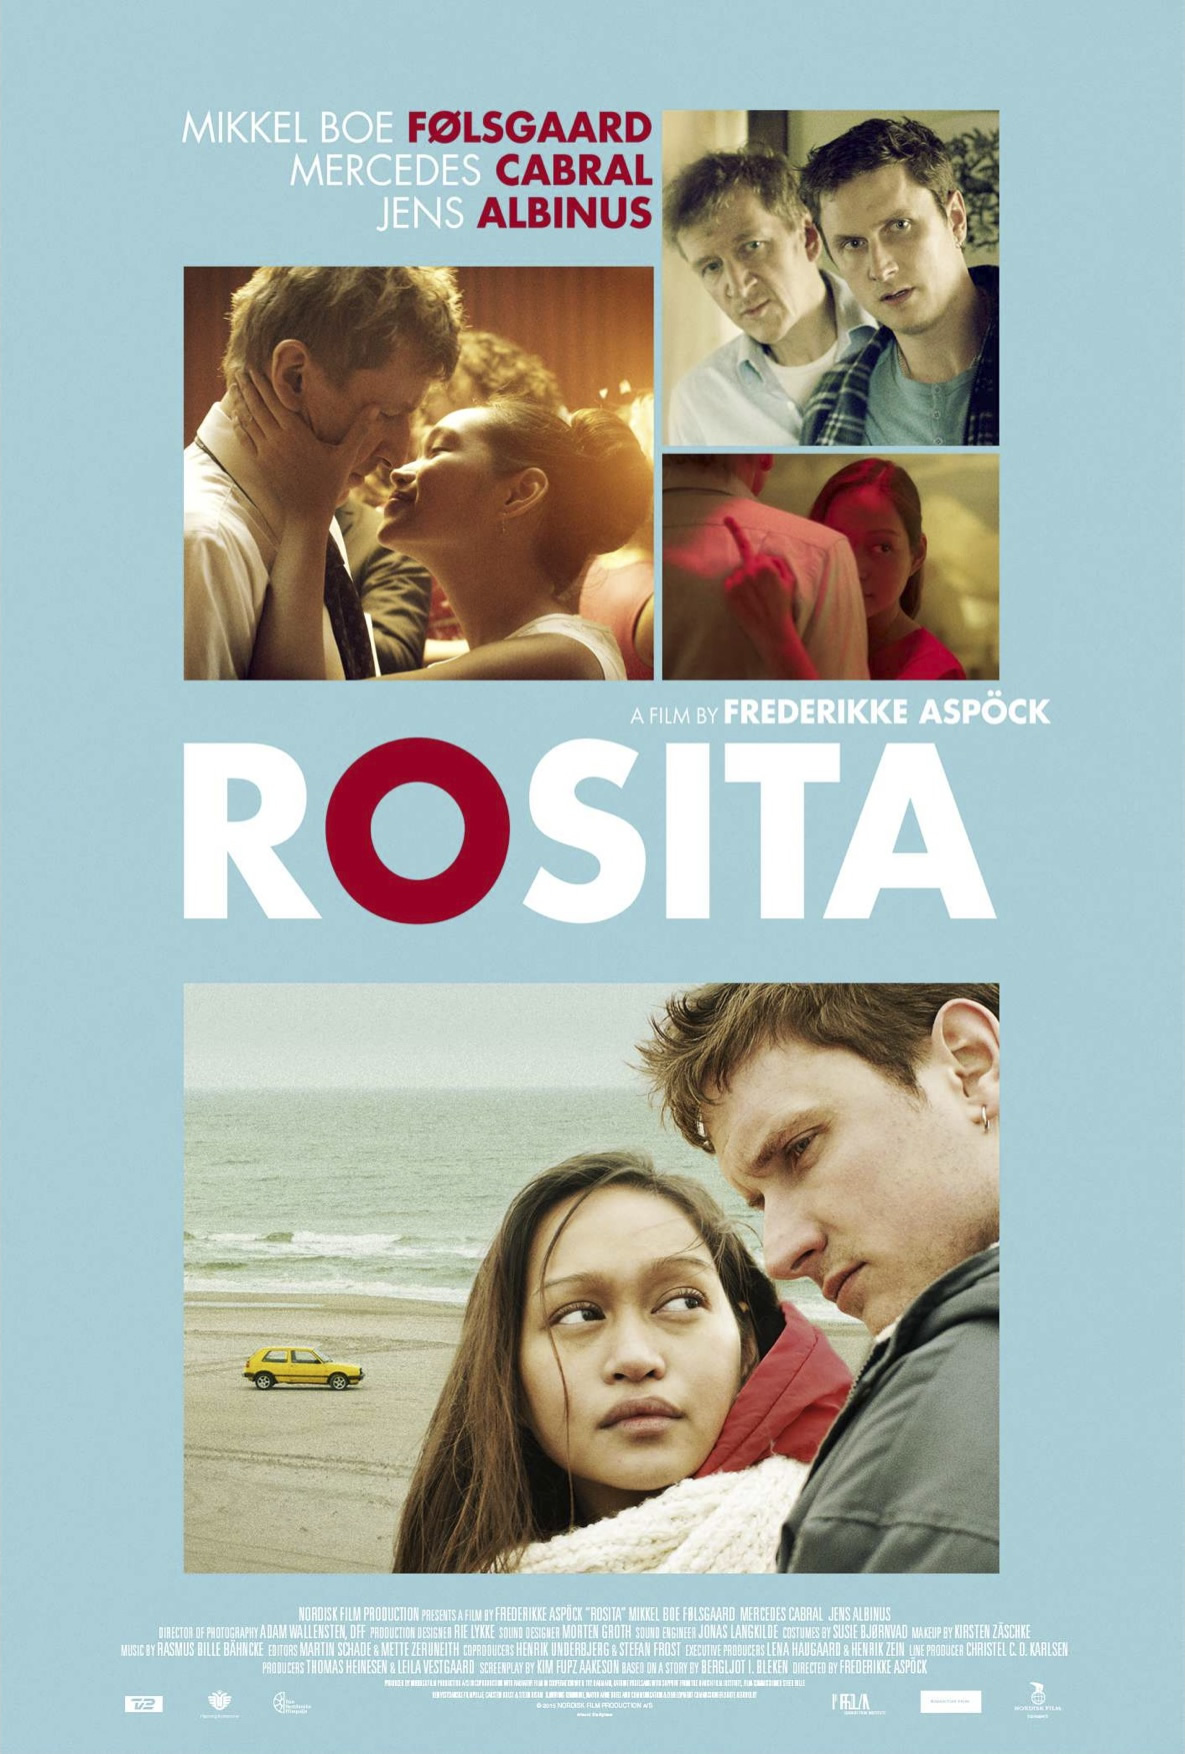 Frederikke Aspöck's awarded Rosita, starring lauded local indie actress Mercedes Cabral and debuting to the country in the 2nd Danish Film Festival